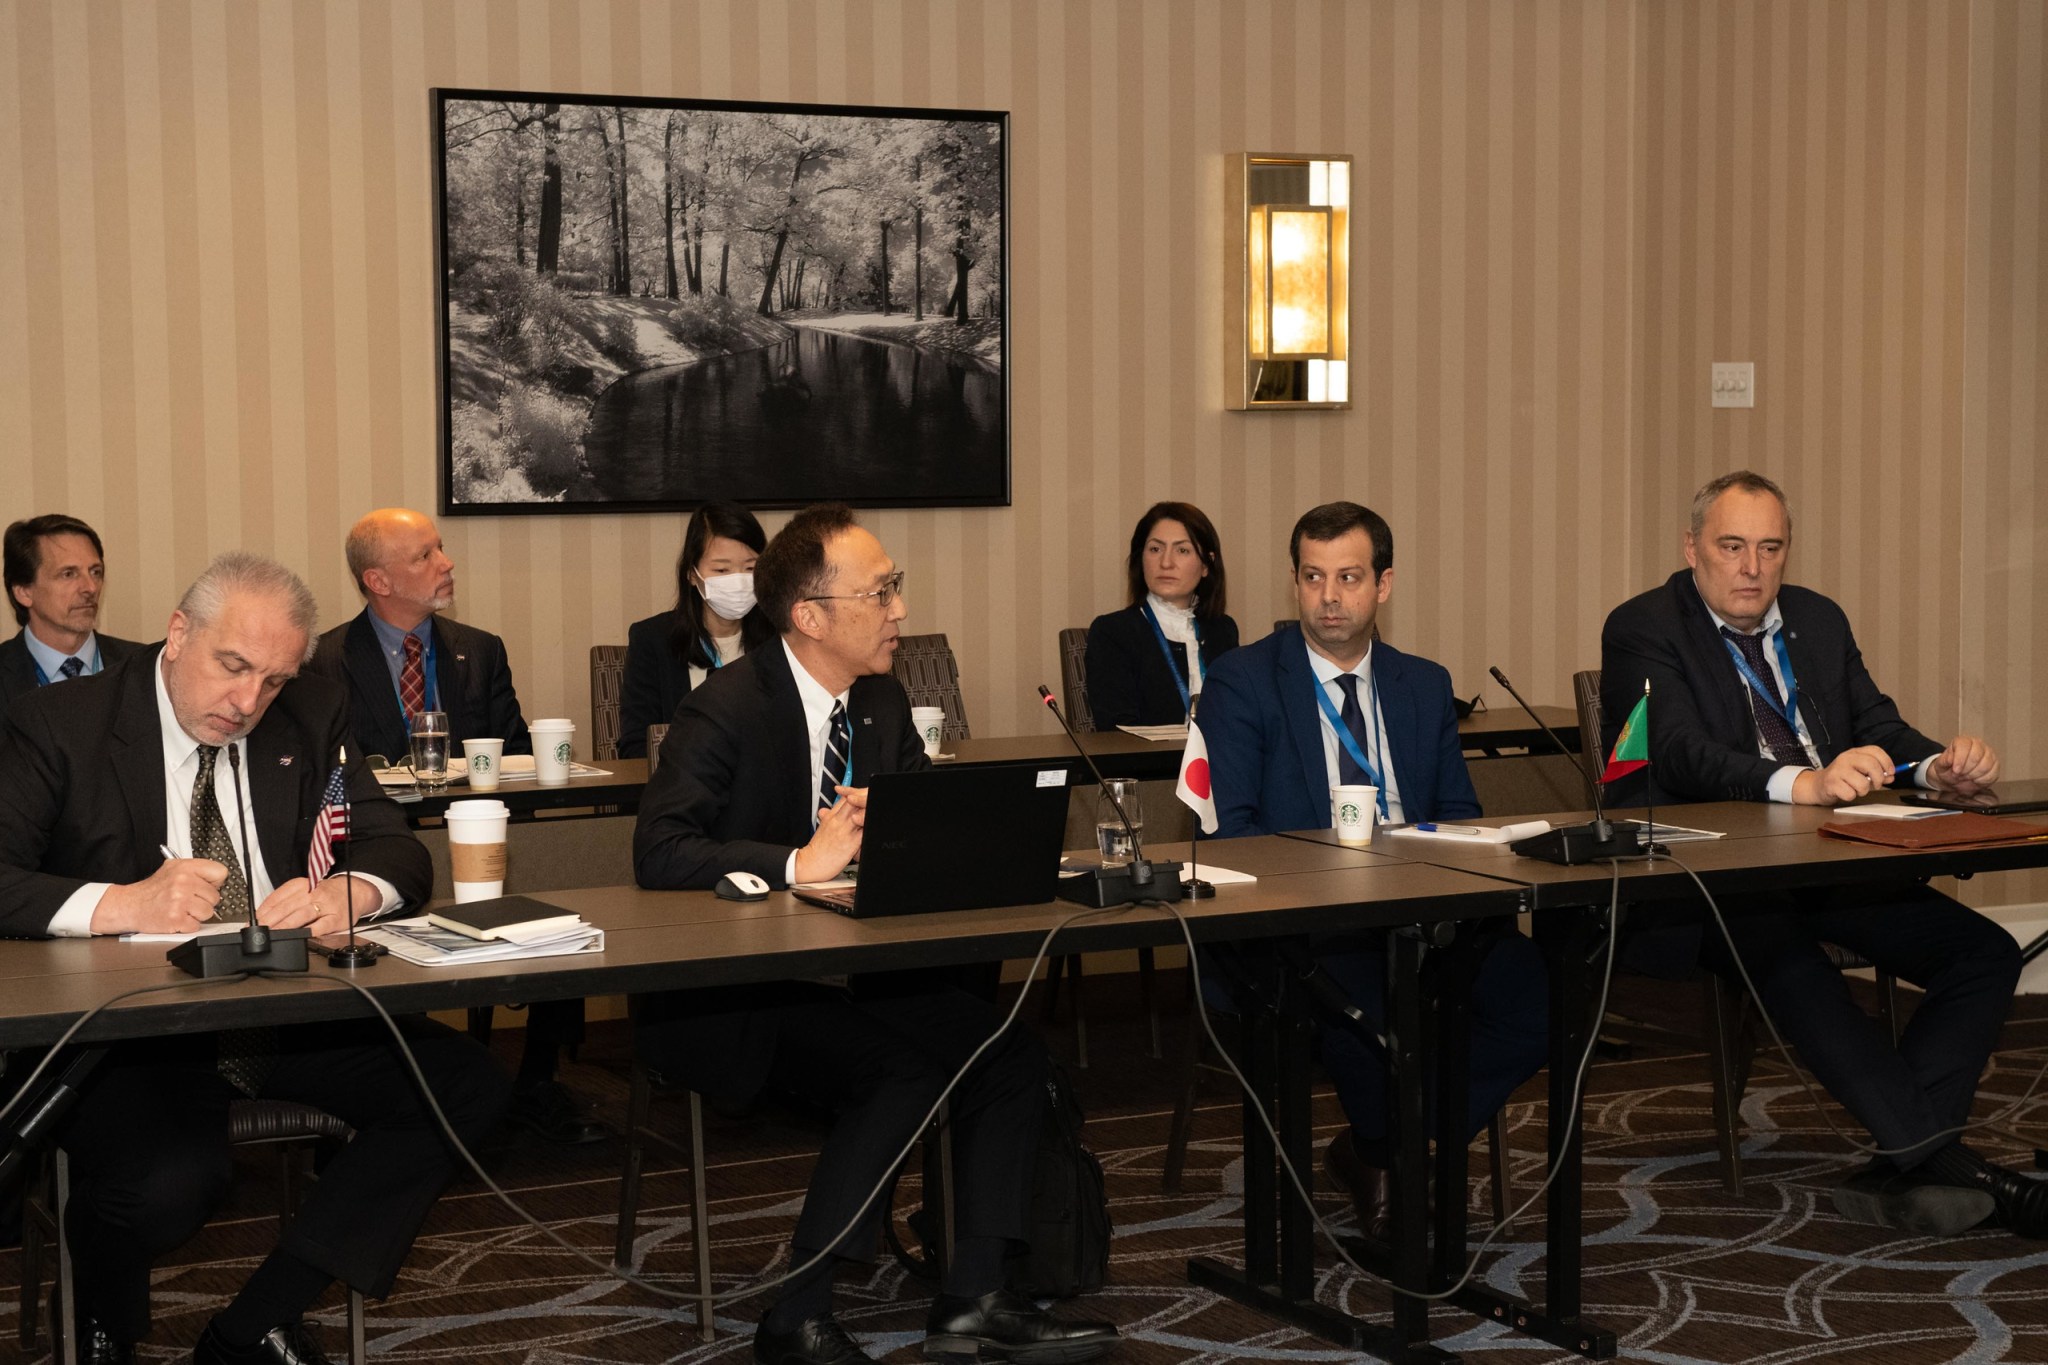 Members of the International Forum for Aviation Research (IFAR) and International Civil Aviation Organization (ICAO) attend the signing of a memorandum of understanding at a National Research Council Canada event in Montreal, Canada on April 5.